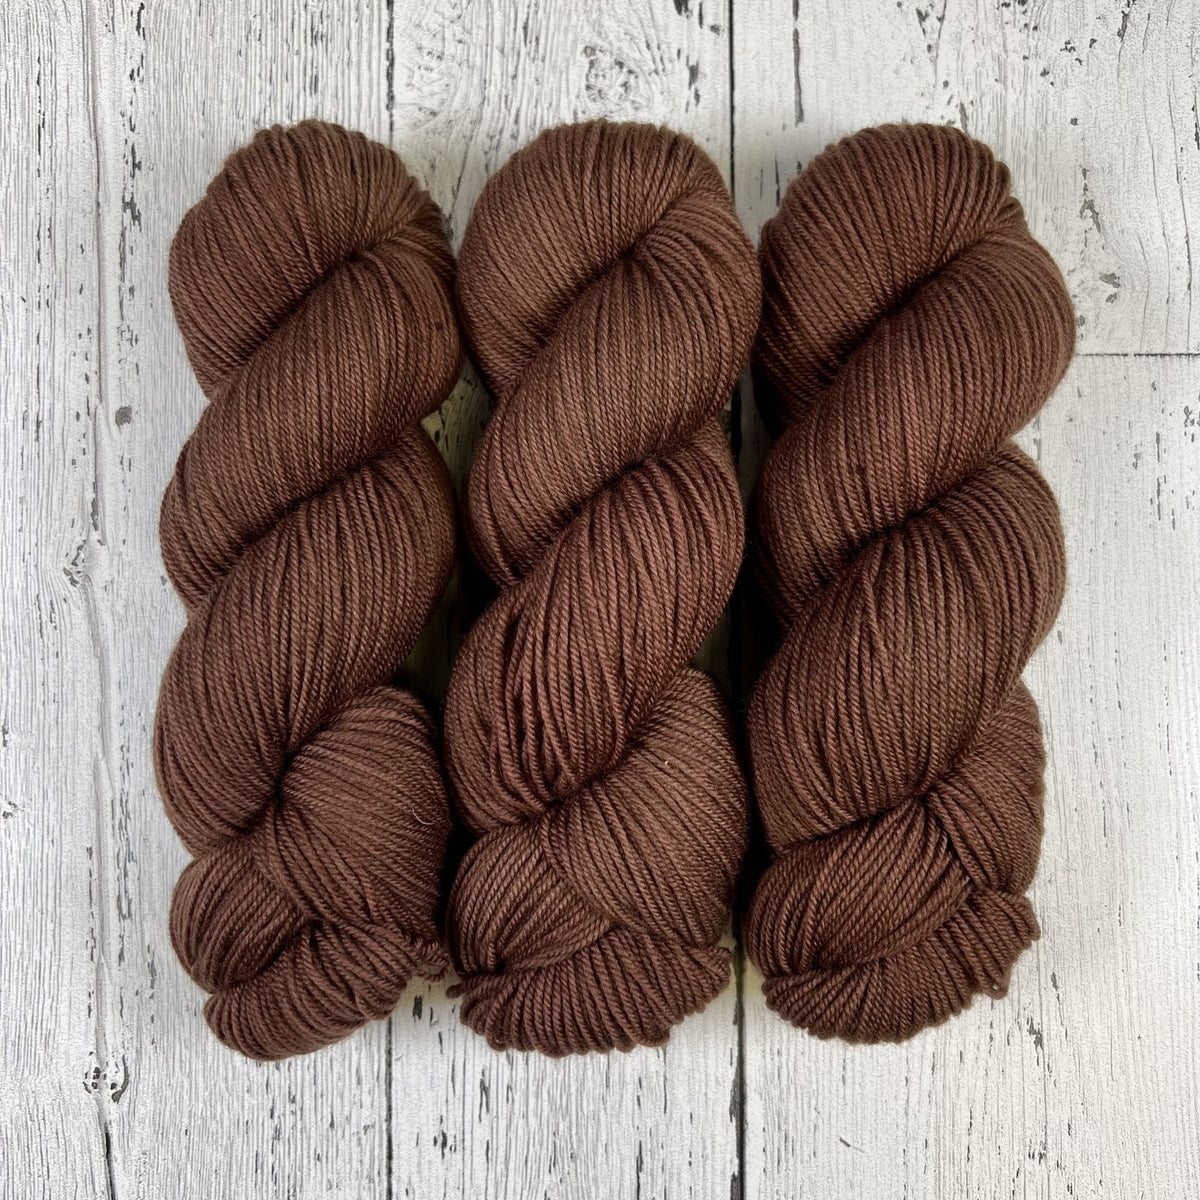 Chocolate Lab - Passion 8 Fingering - Dyed Stock